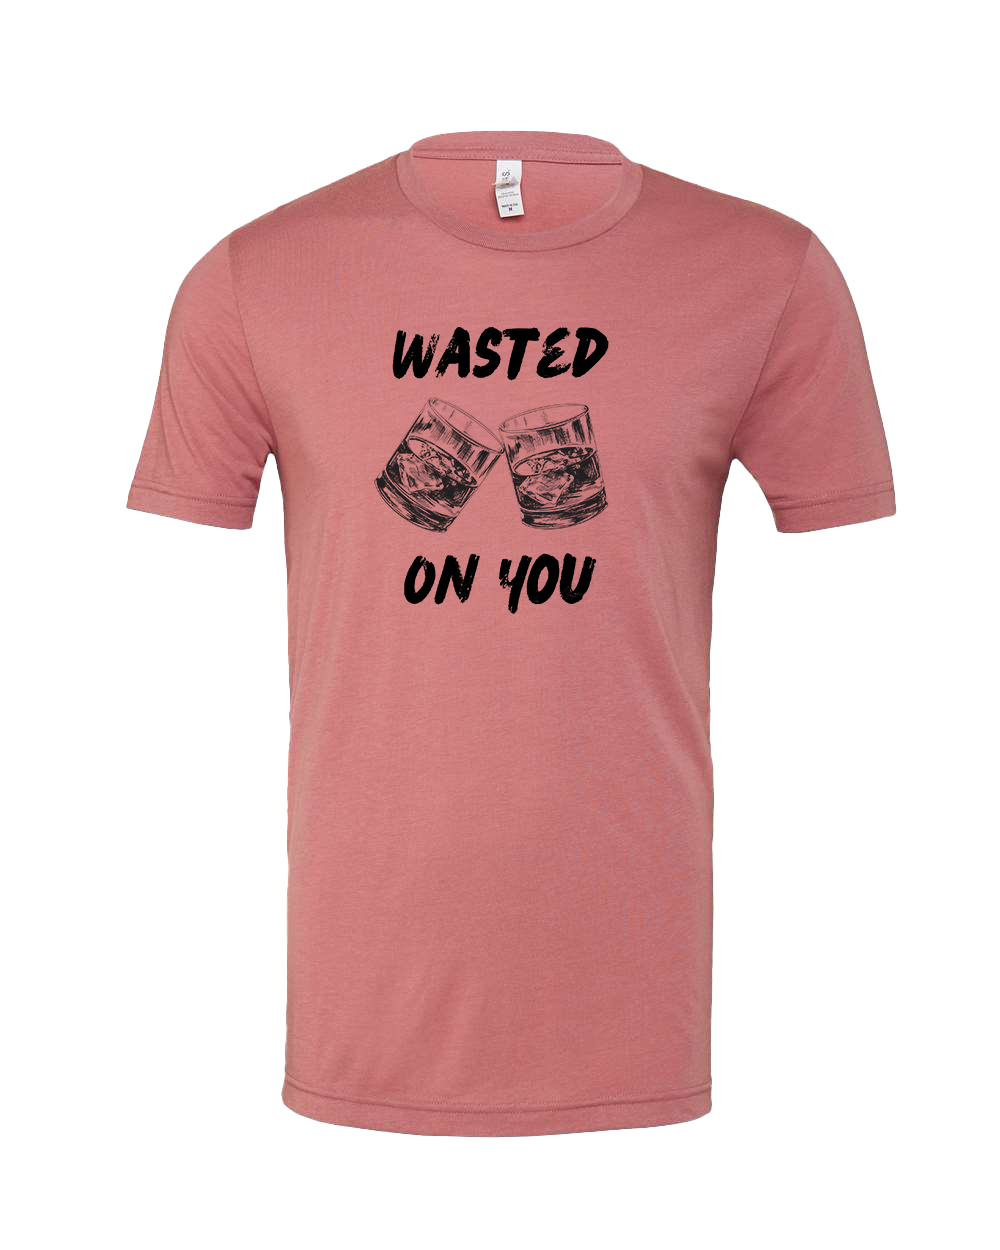 Wasted on You tshirt - Various Colors